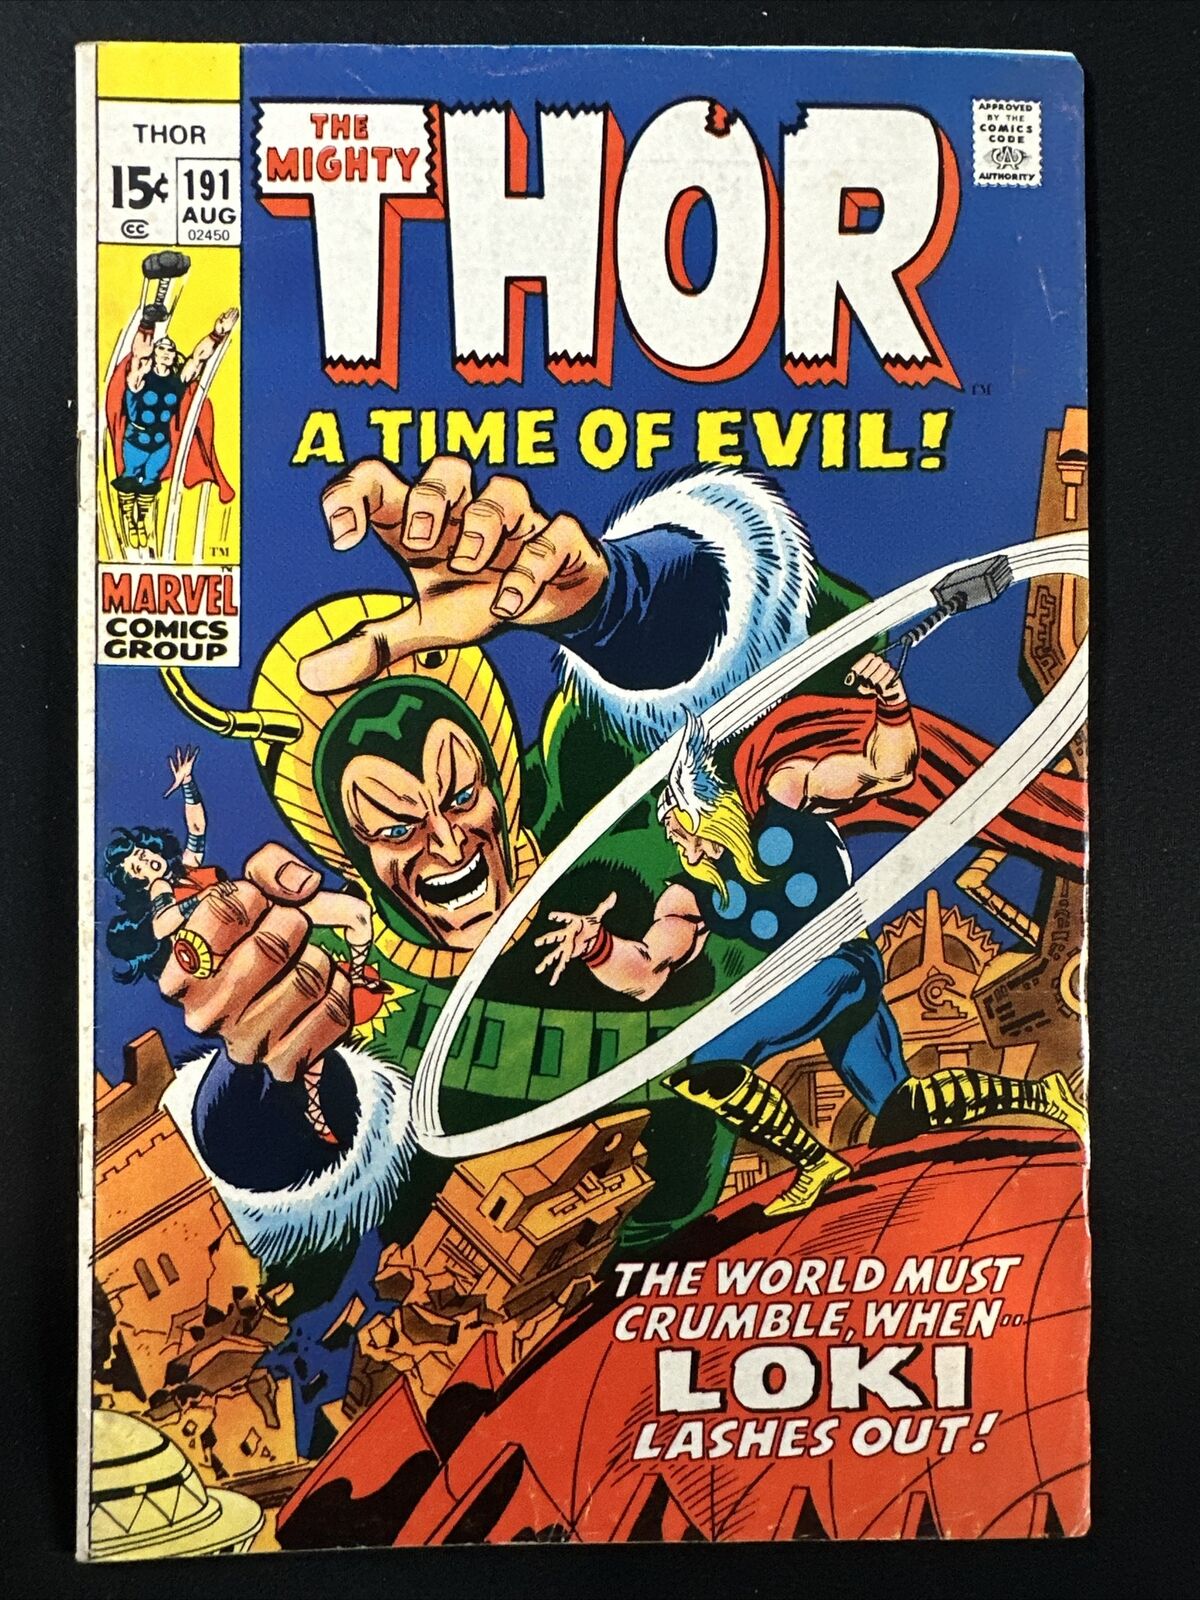 The Mighty Thor #191 Vintage Marvel Comics Silver Age 1st Print 1971 VG *A2